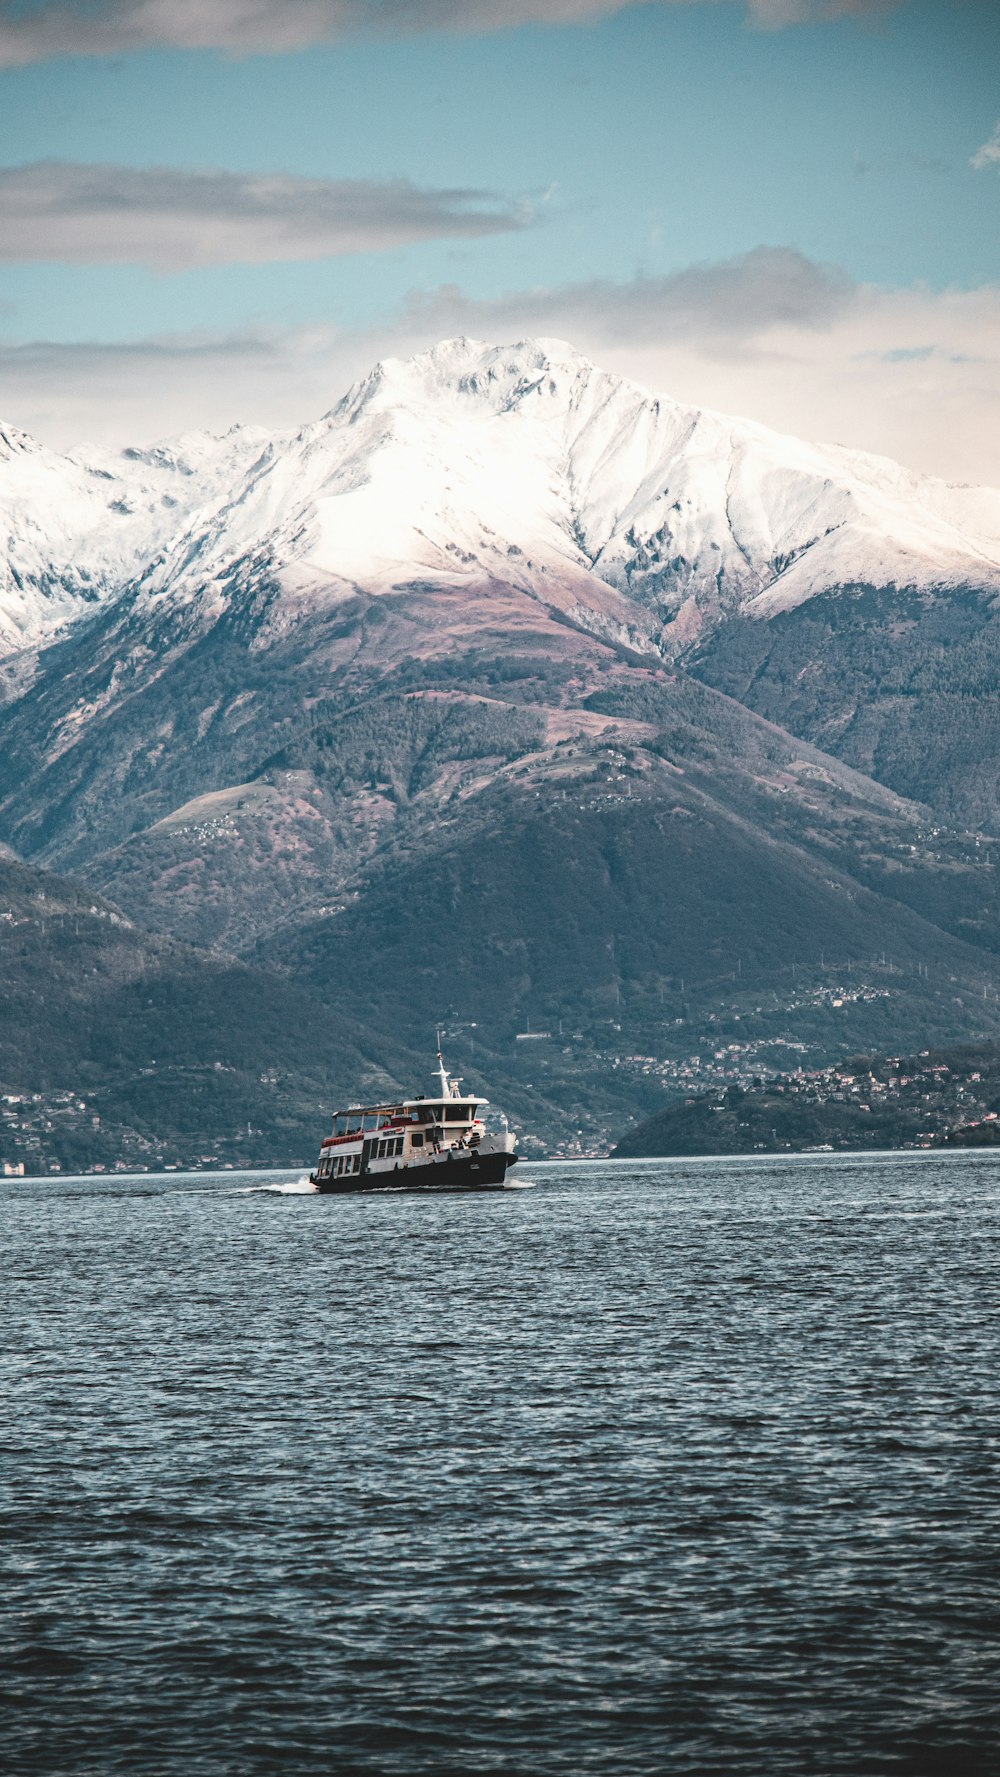 a boat on a large body of water with mountains in the background